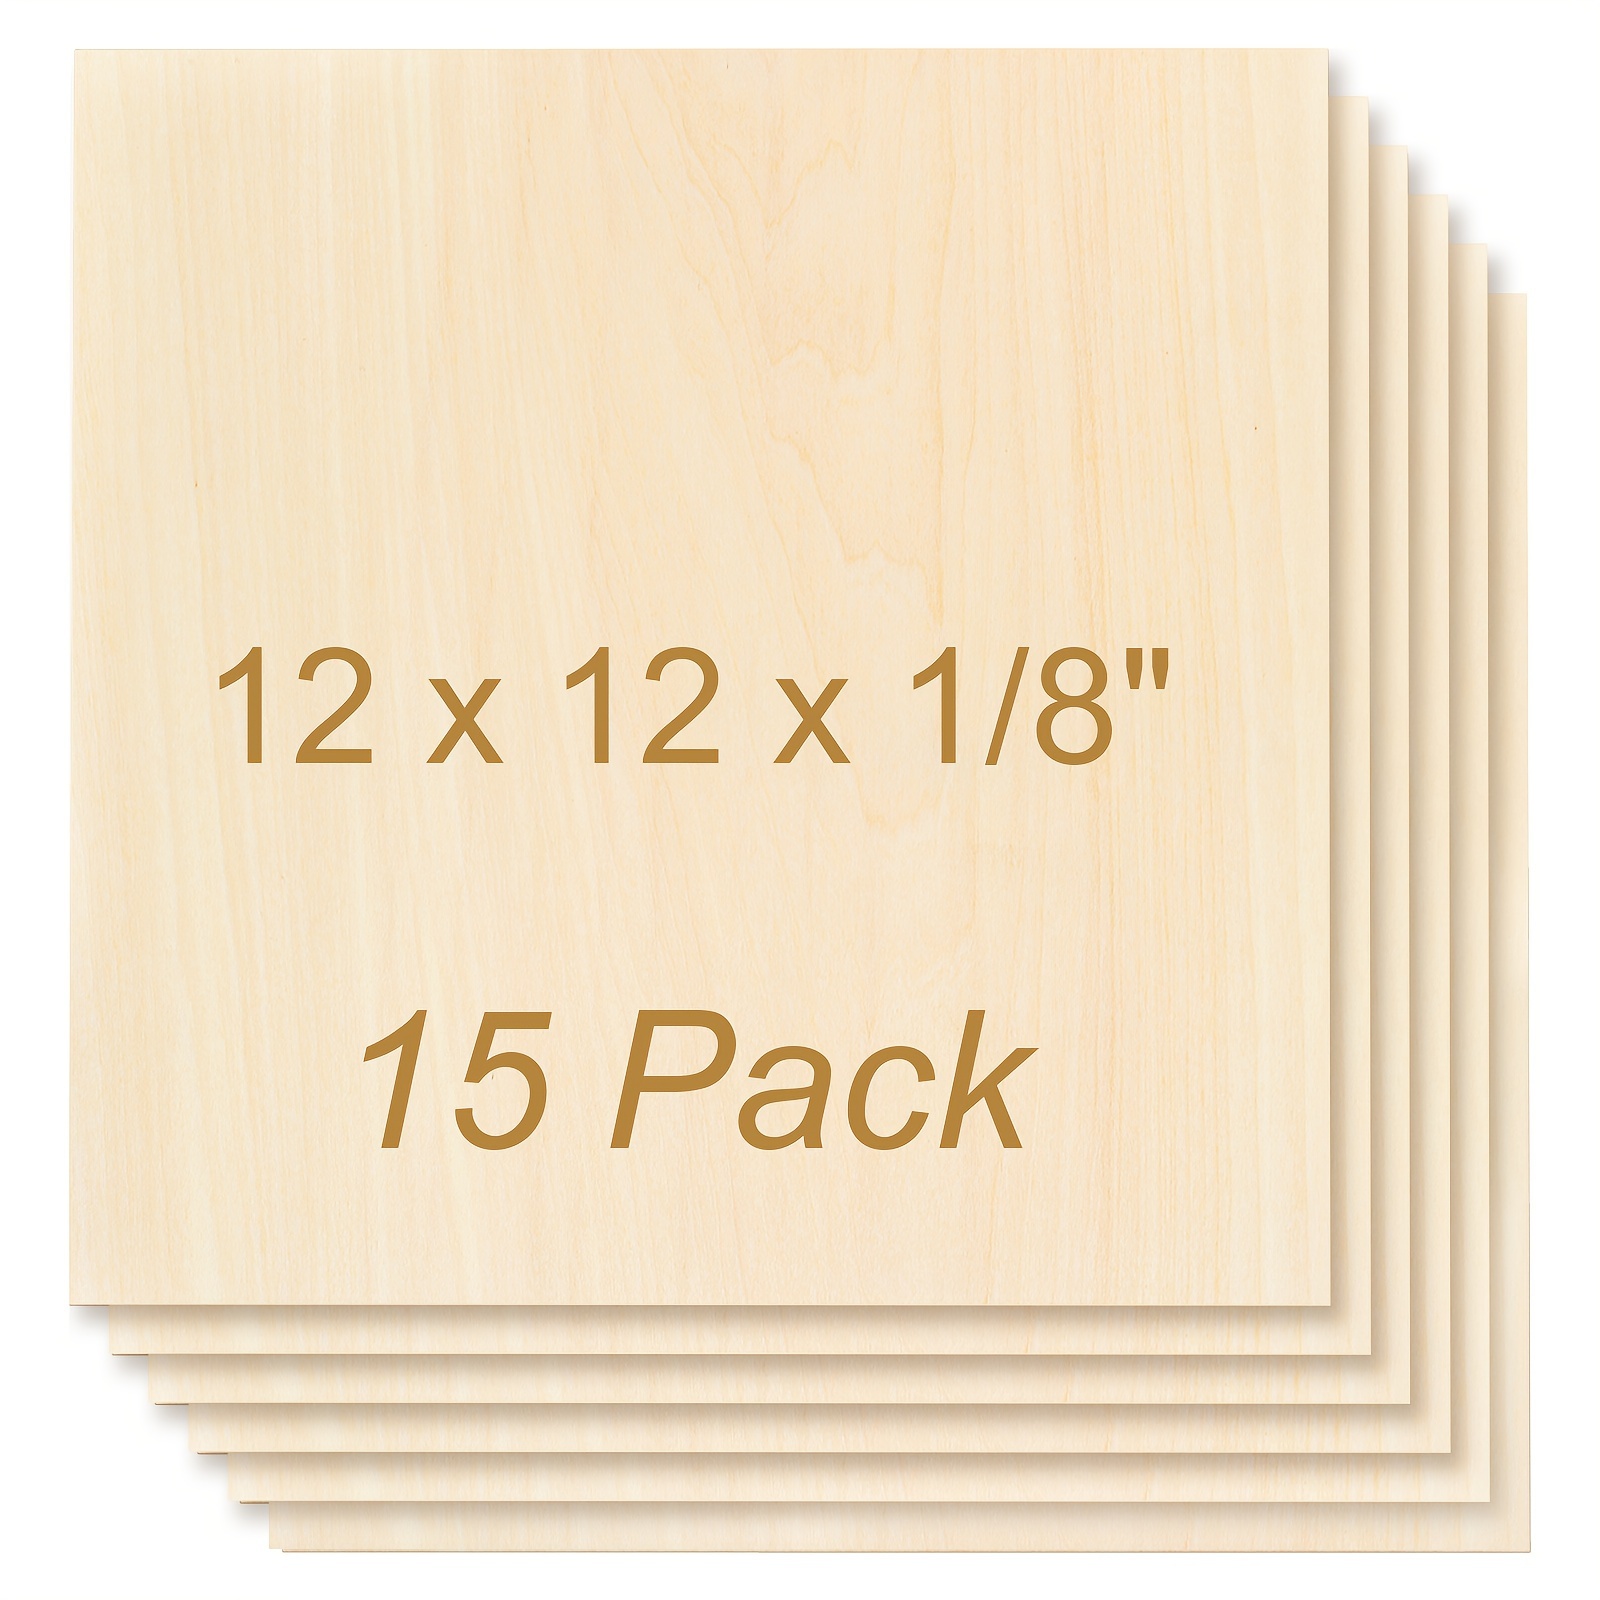 

Tocome 15 Pack 3mm Basswood Plywood 12 X 12 X 1/8" Plywood Sheets For Laser Cutting Engraving 305x305x3mm Laser Bass Wood Boards For Crafts Laser Projects (12x12x1/8", 15 Pcs)